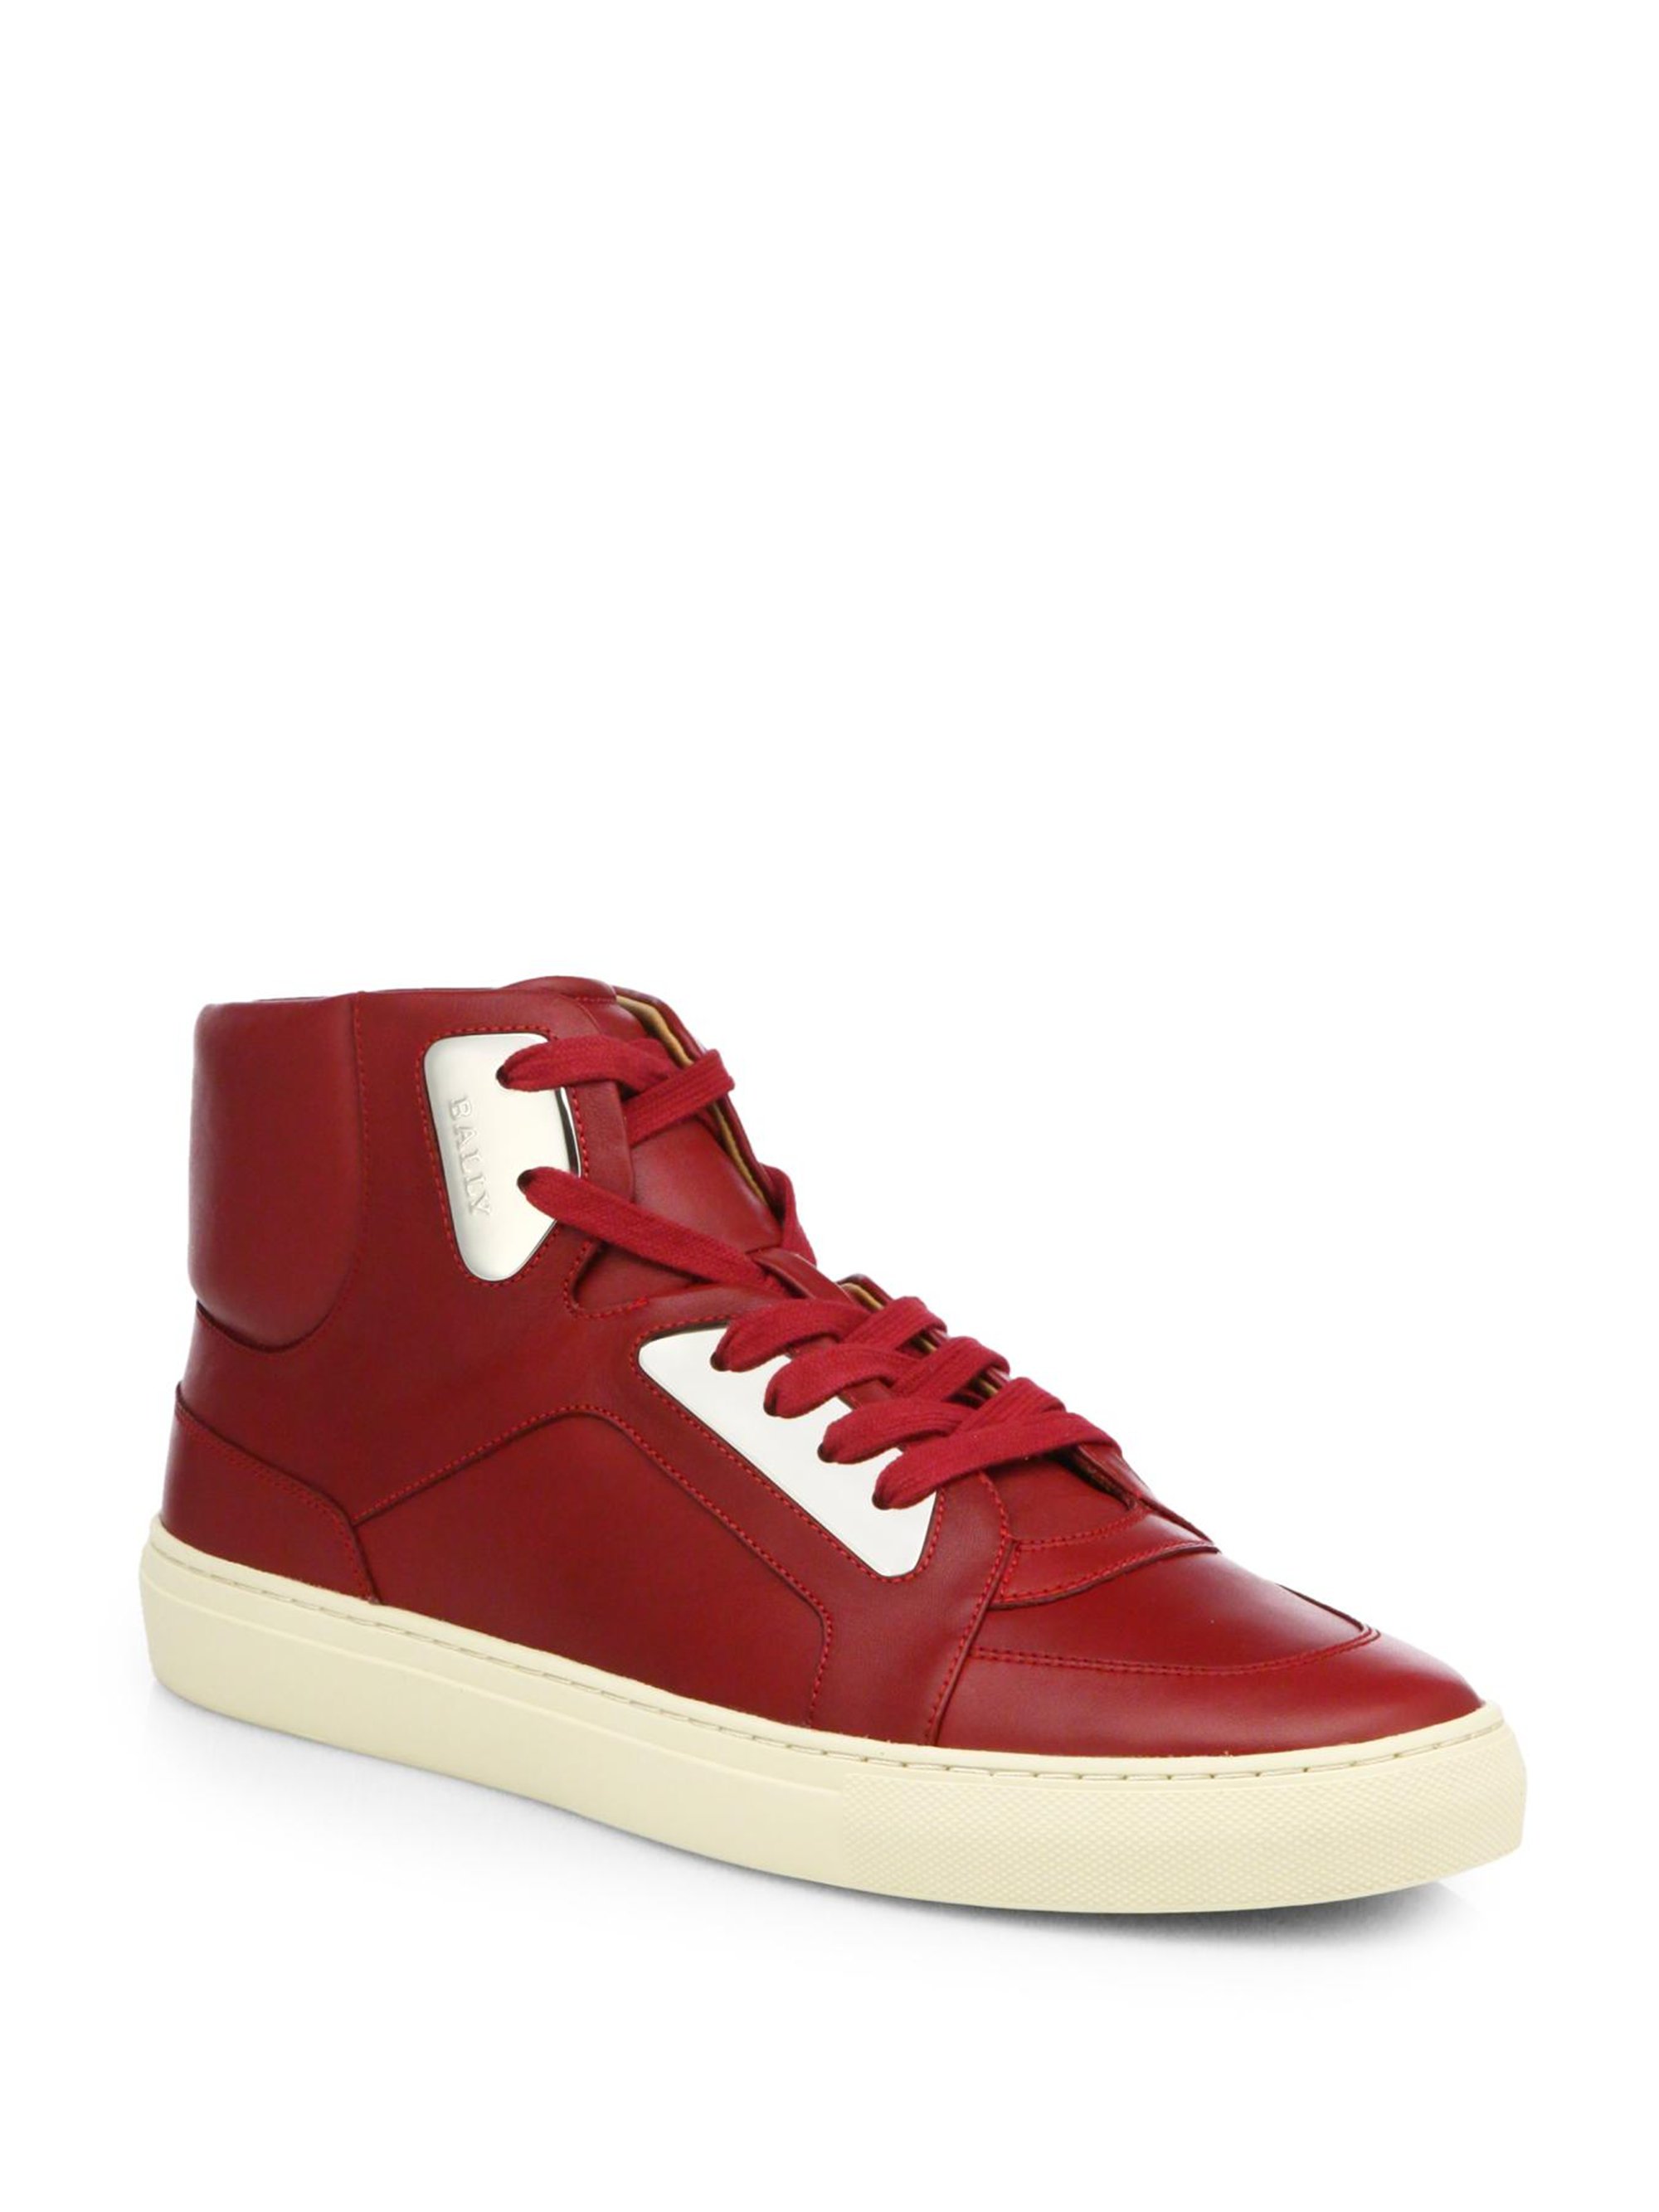 Bally Leather High-Top Sneakers in Red for Men (BALLY-RED) | Lyst